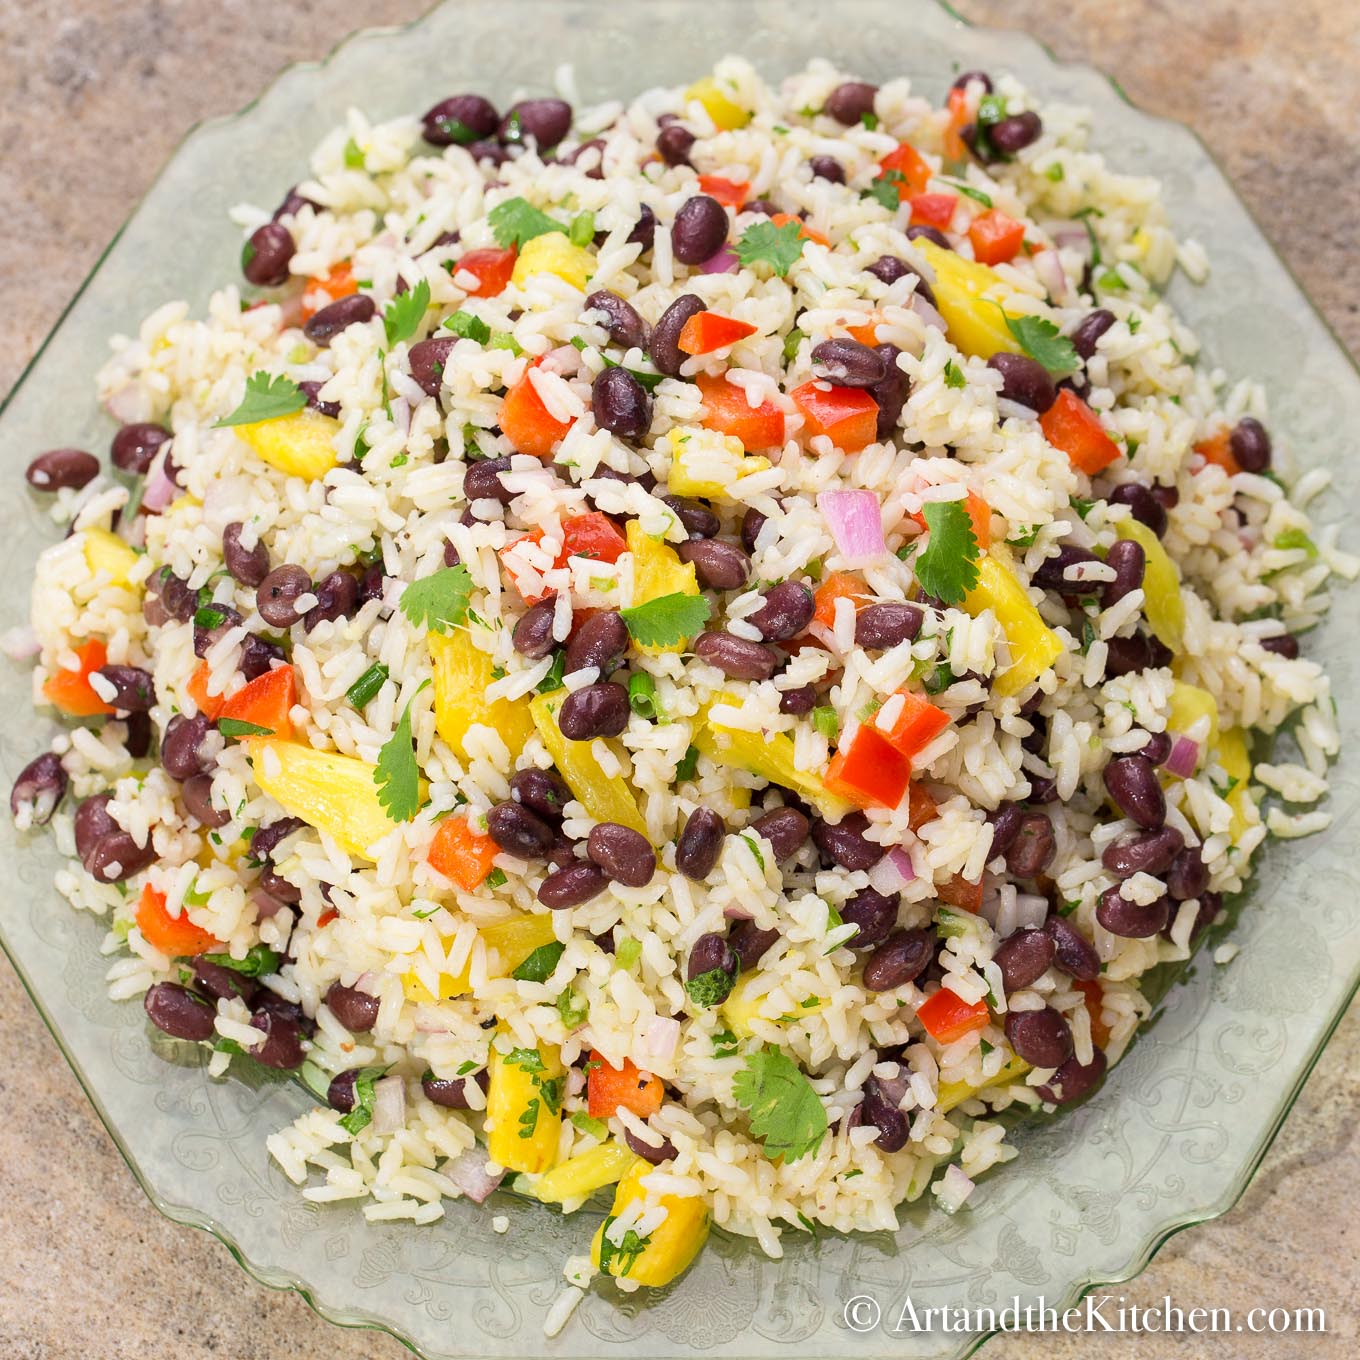 Colorful salad with coconut rice, black bean, pineapple, red peppers, onion, and cilantro on a green plate.